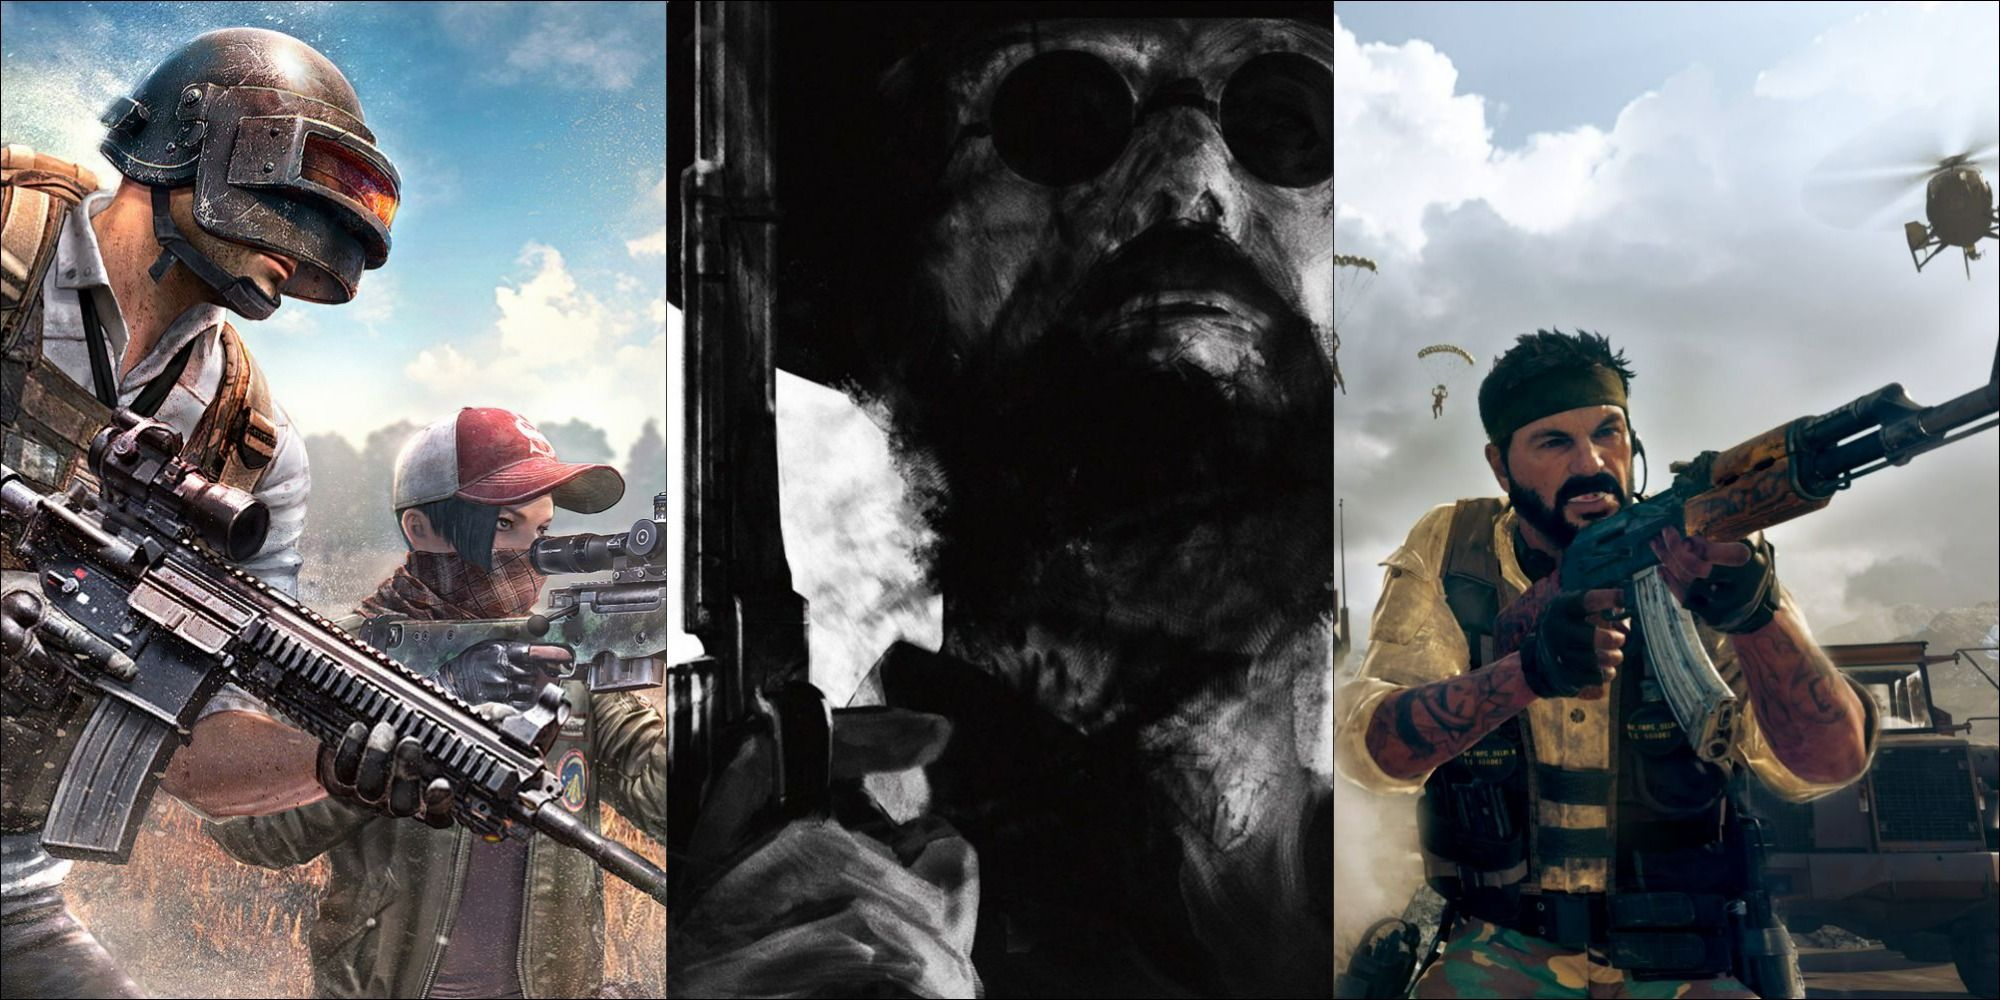 Characters from PUBG: Battlegrounds, Hunt: Showdown, and Call of Duty: Warzone